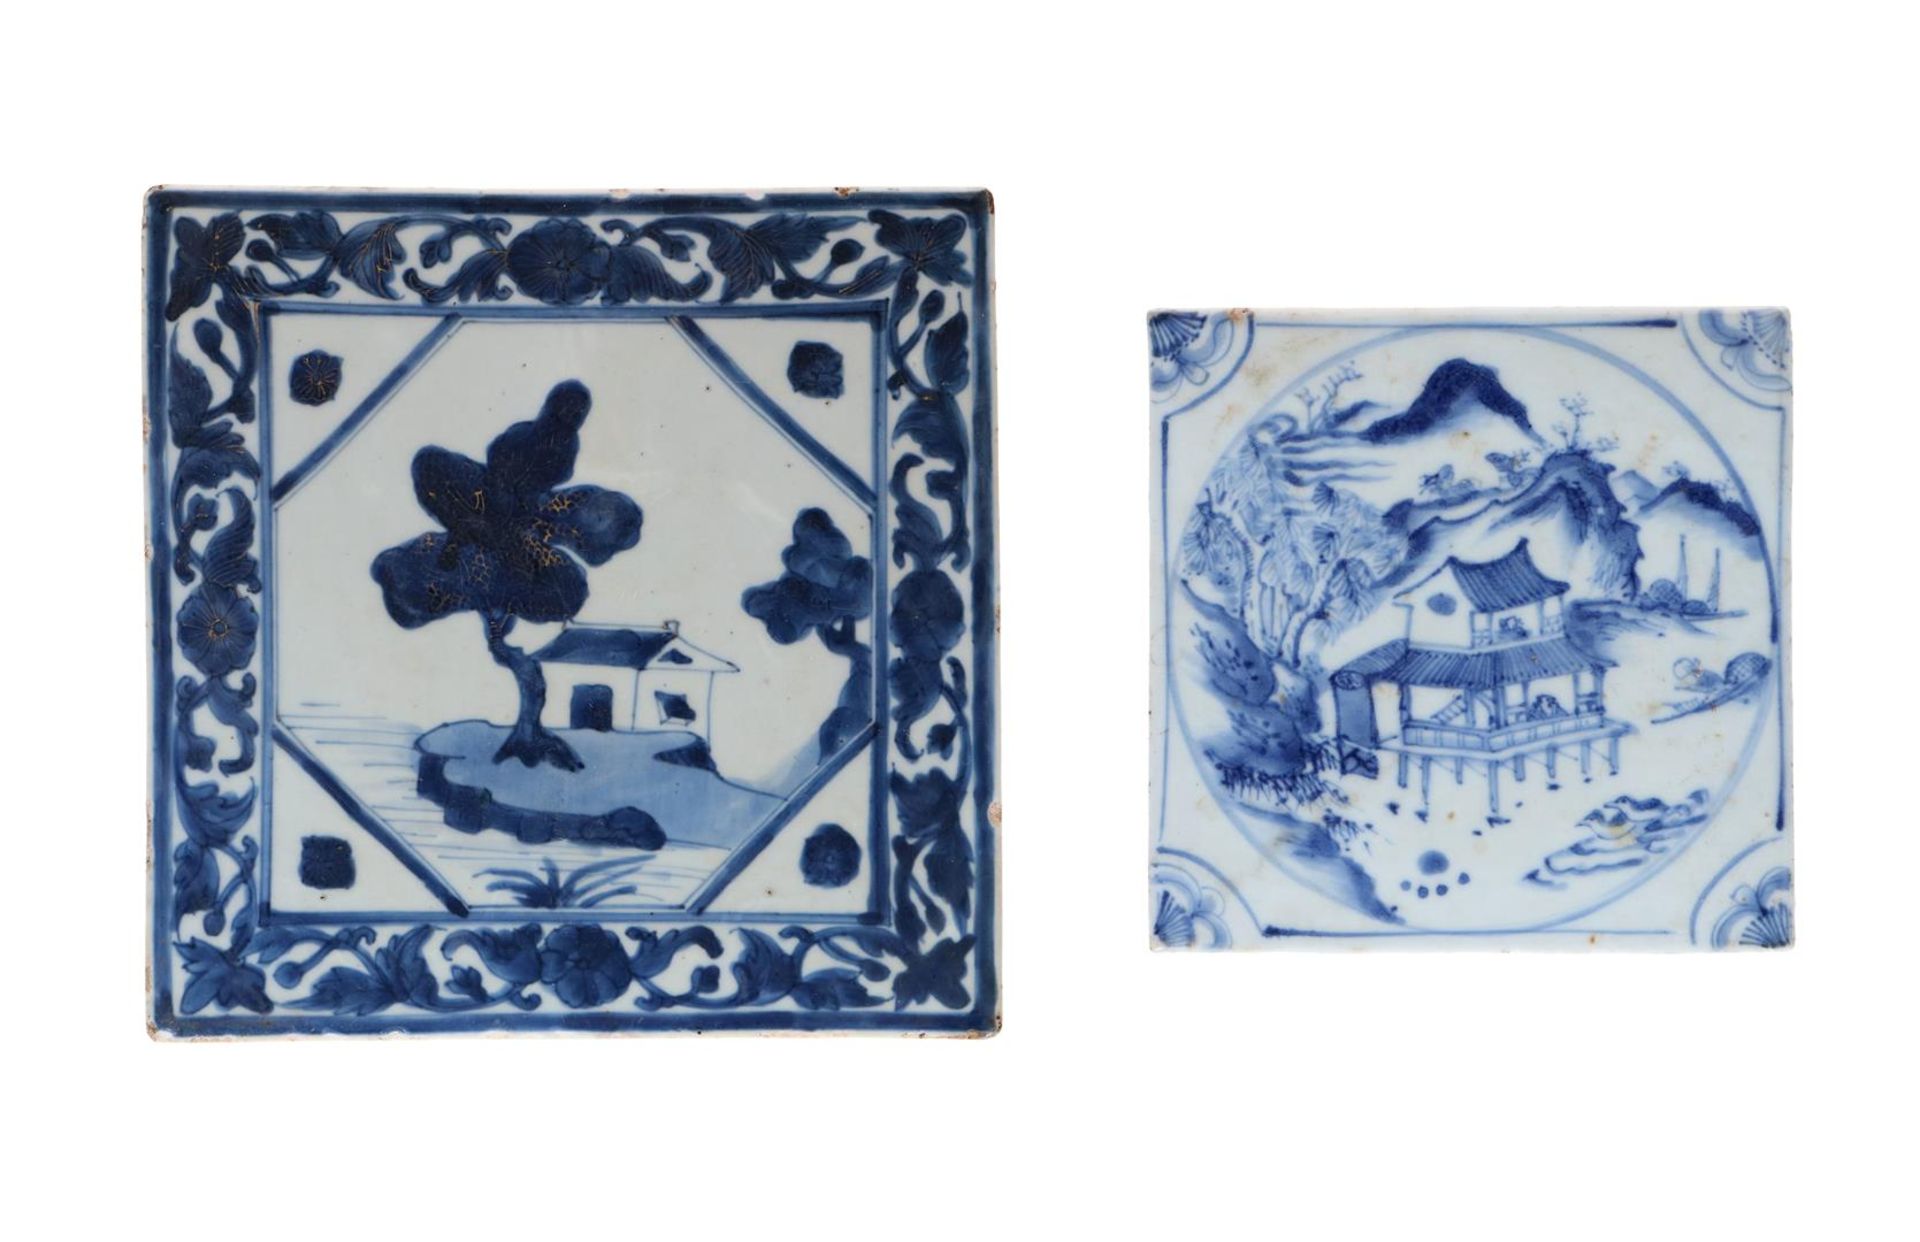 Lot of two blue and white porcelain tiles, 1) decorated with a river landscape and flowers. 2)